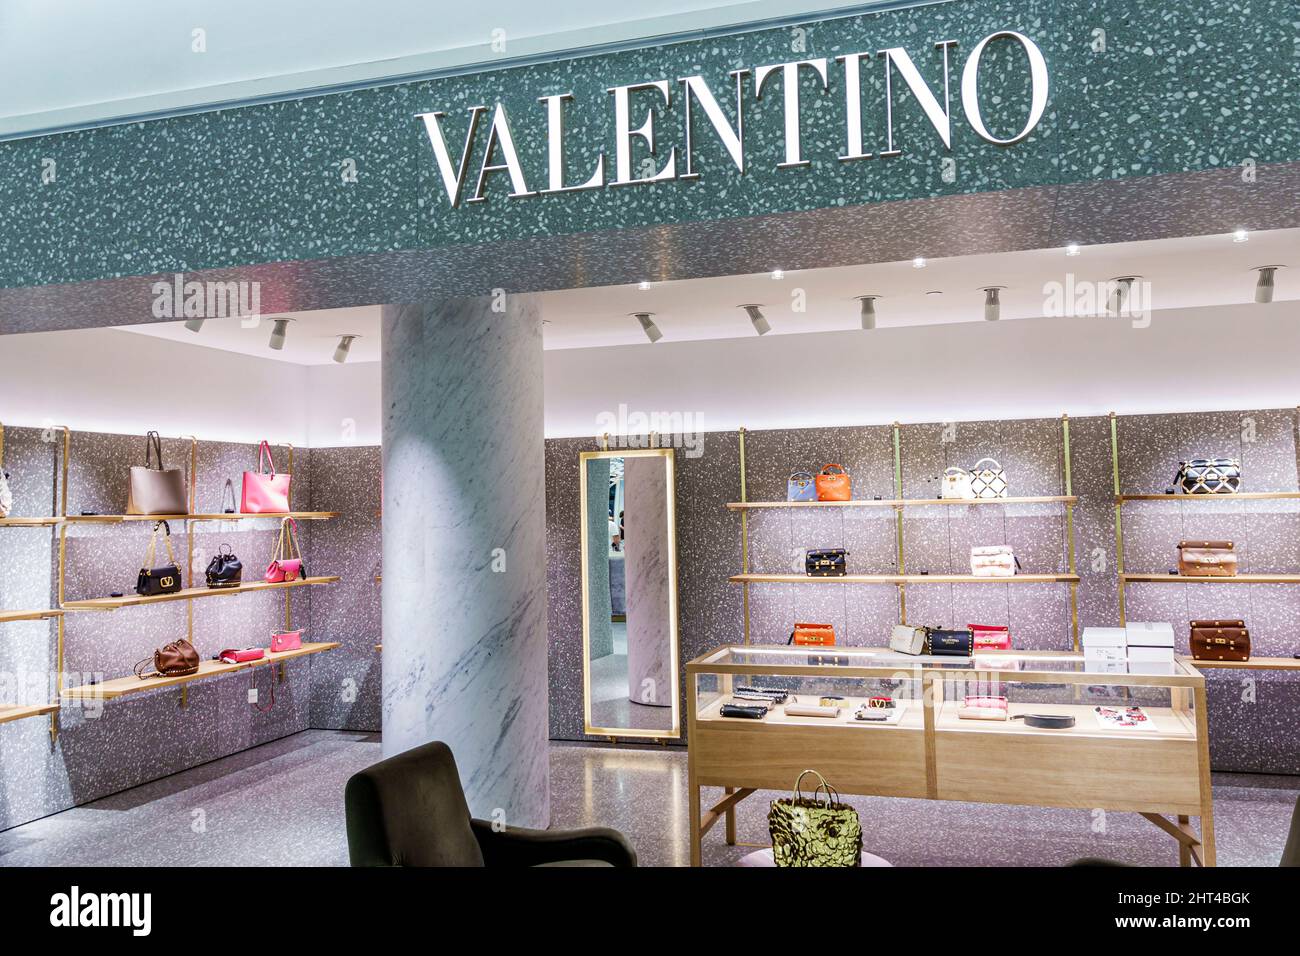 Bal Harbour Florida Bal Harbour Shops upscale luxury designer mall shopping Saks Fifth Avenue department store display sale inside interior Valentino Stock Photo